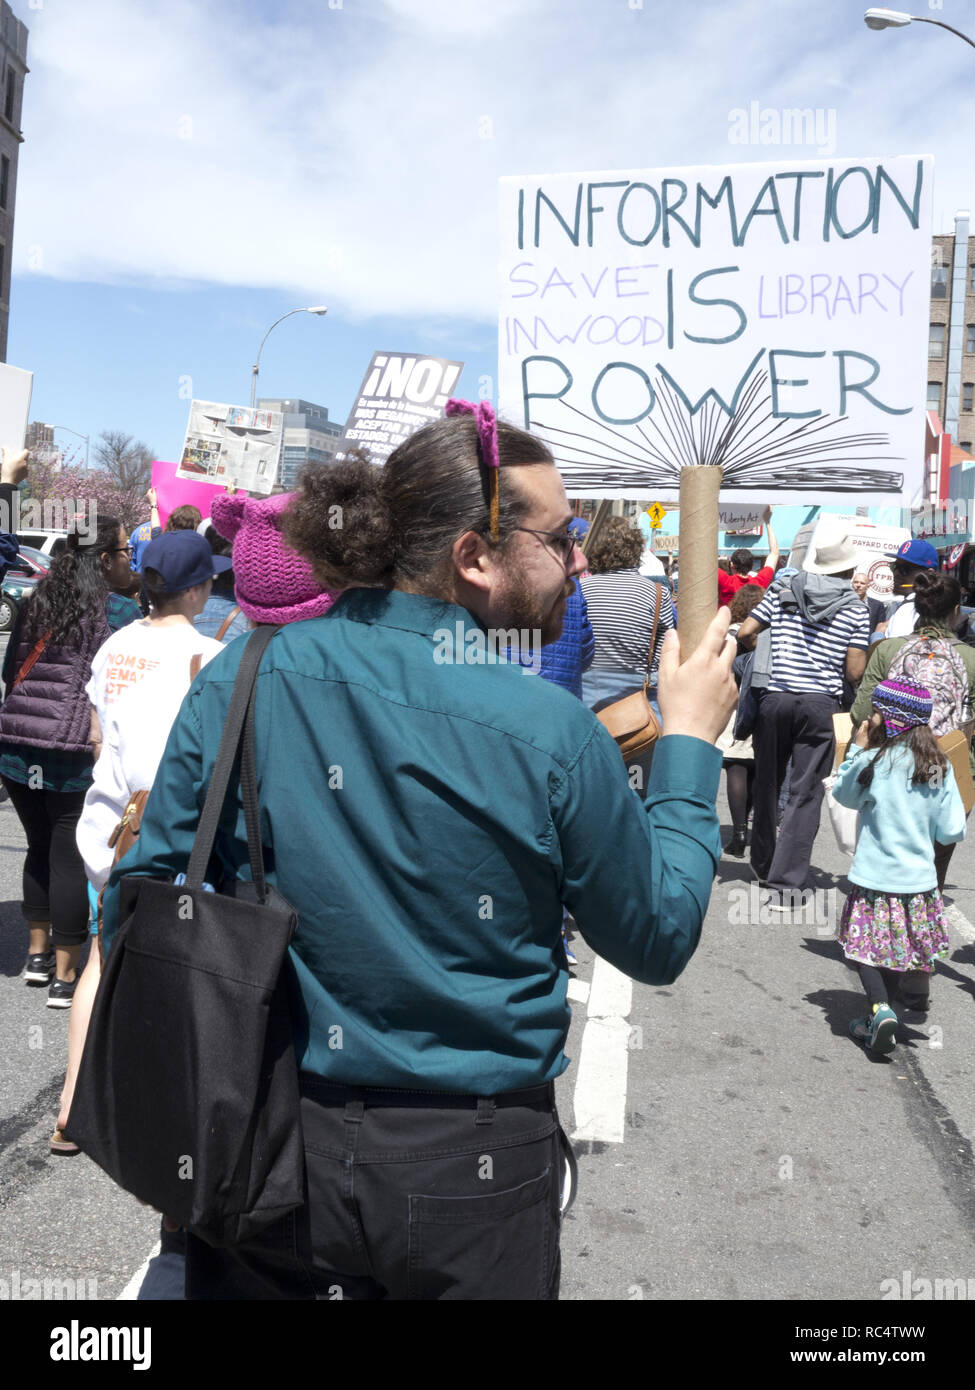 Hundreds of protesters gathered in Harlem to rally and march in The Uptown March for Immigrants, 2017. Man holds 'Save Inwood libraries' sign. Stock Photo